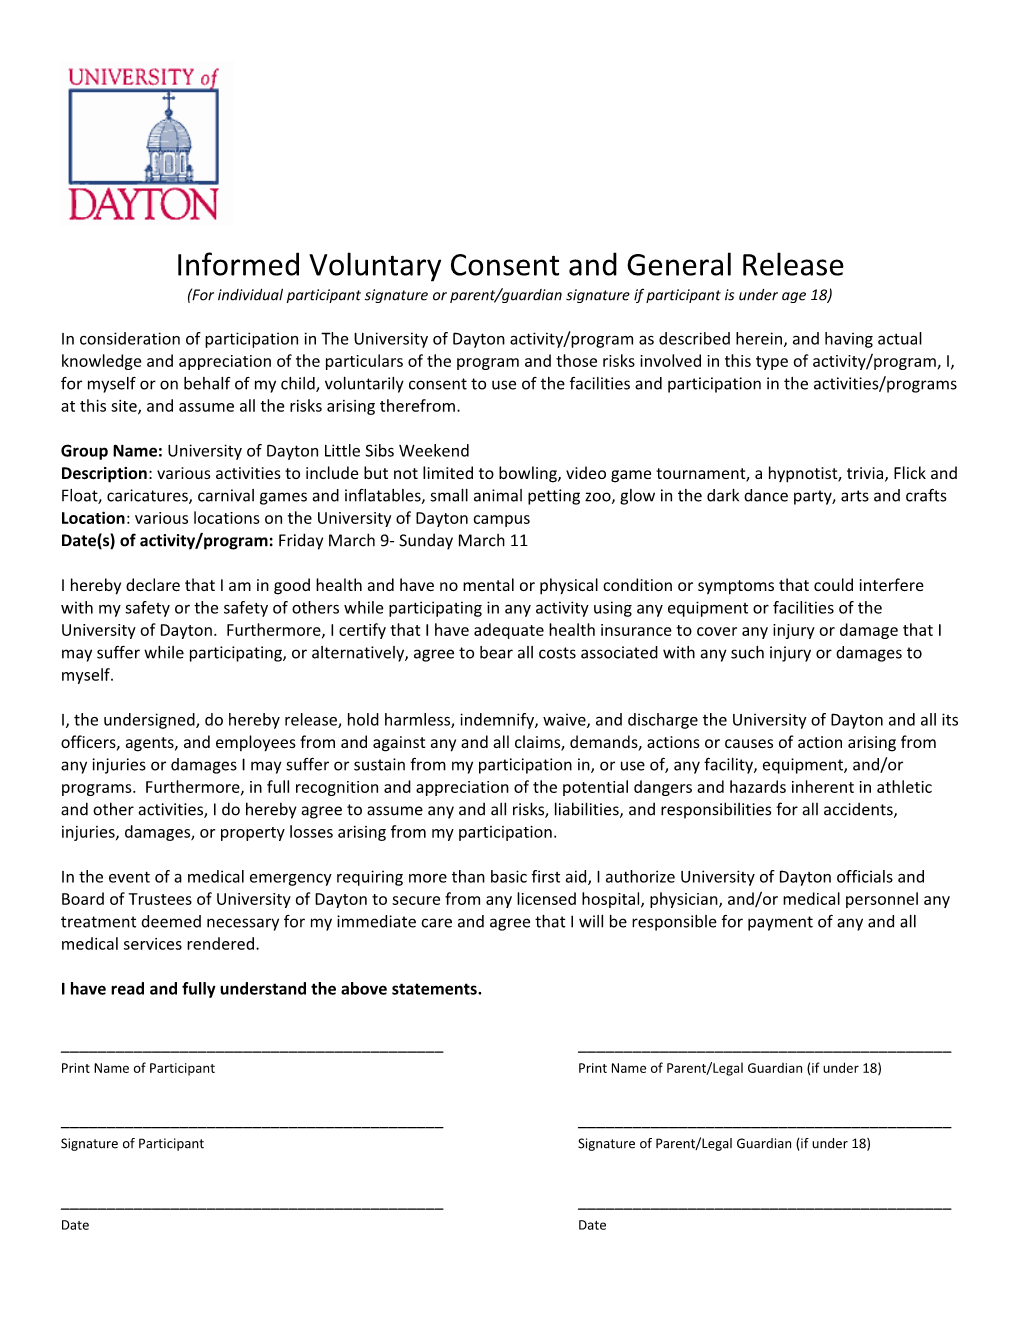 Informed Voluntary Consent and General Release